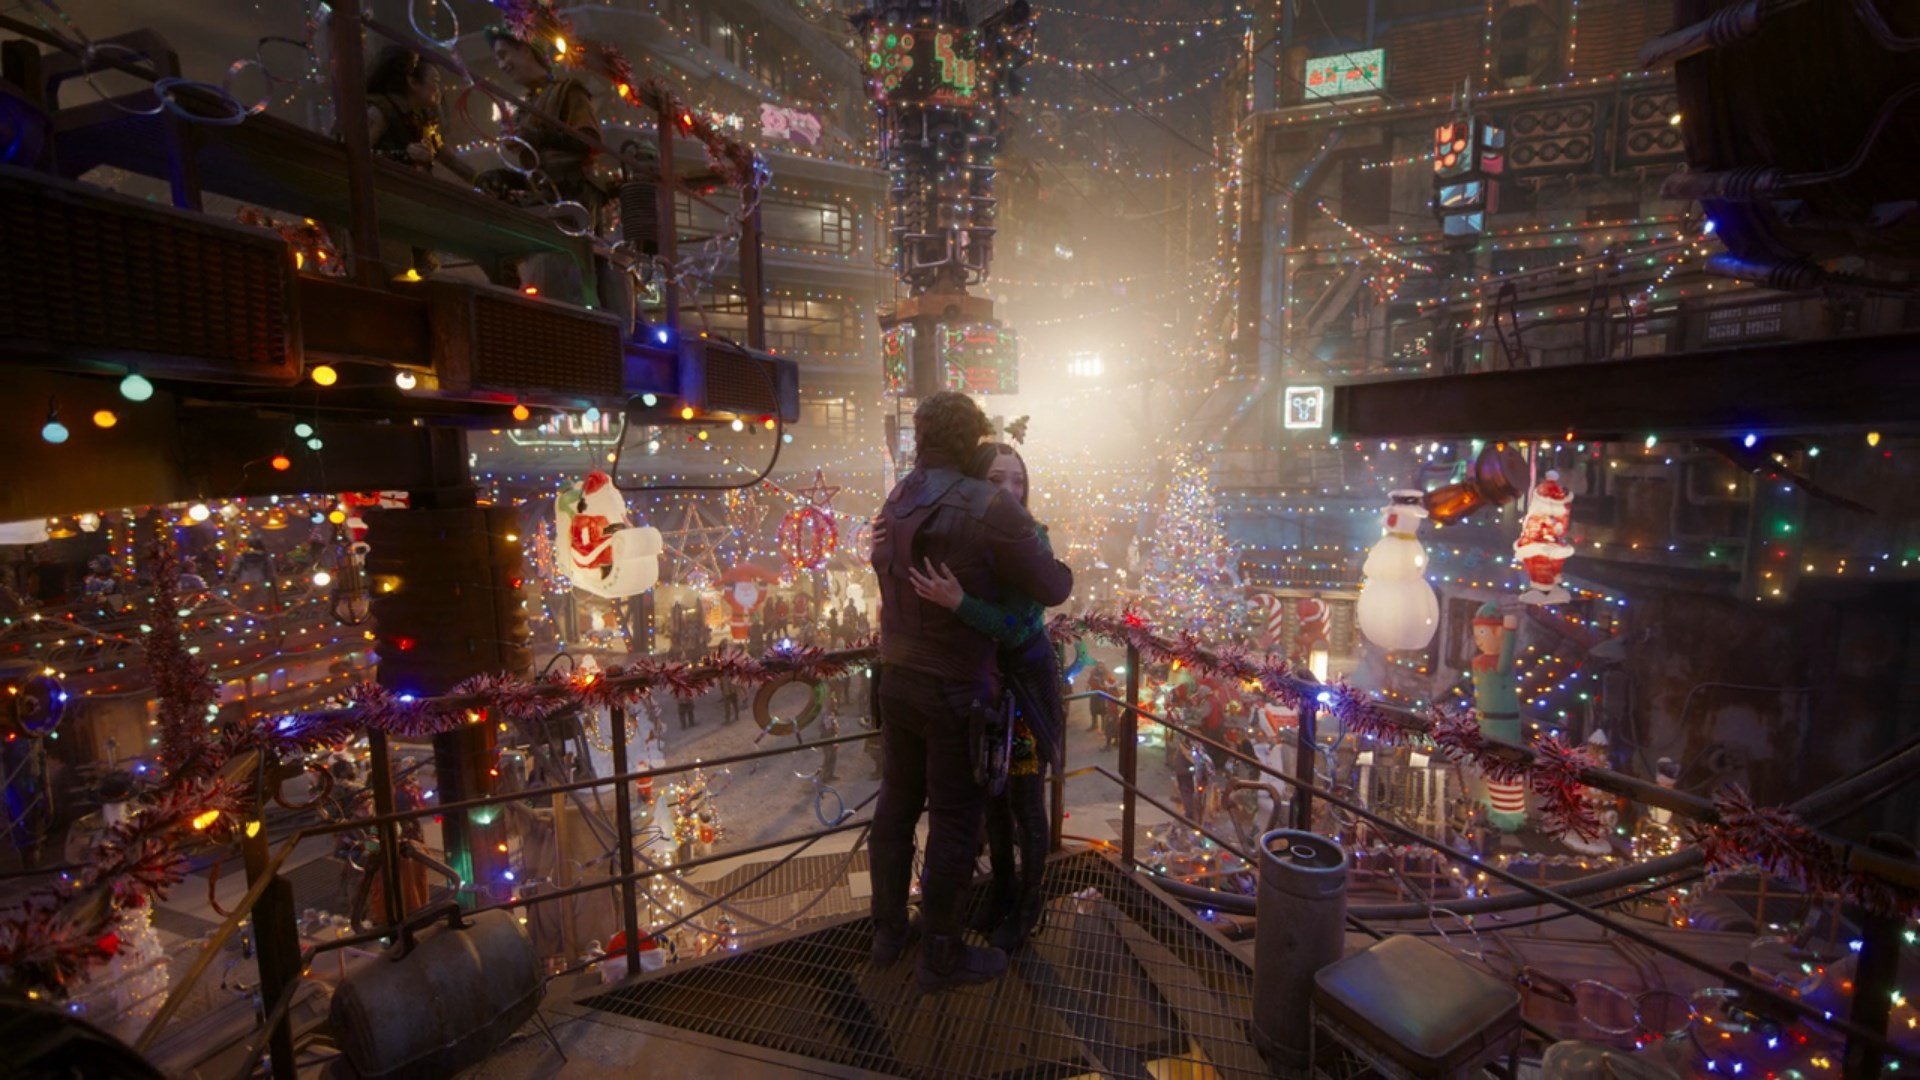 Two characters are embracing in the GotG holiday special.